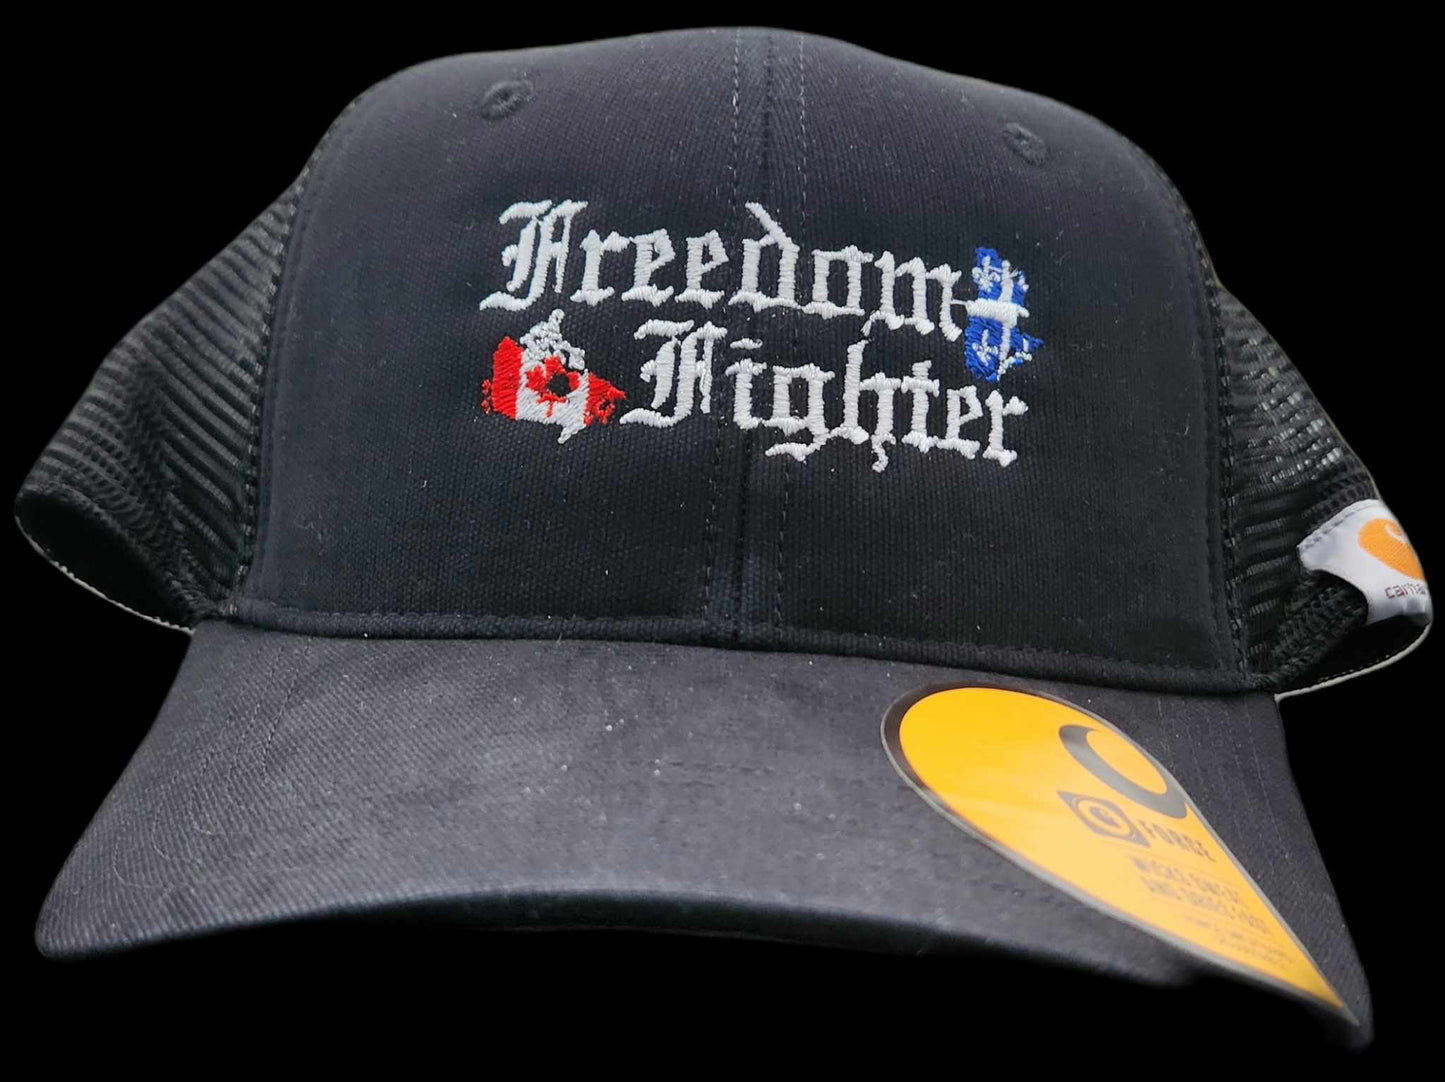 Black Mesh Cap with White Freedom Fighter Letter Embroidery